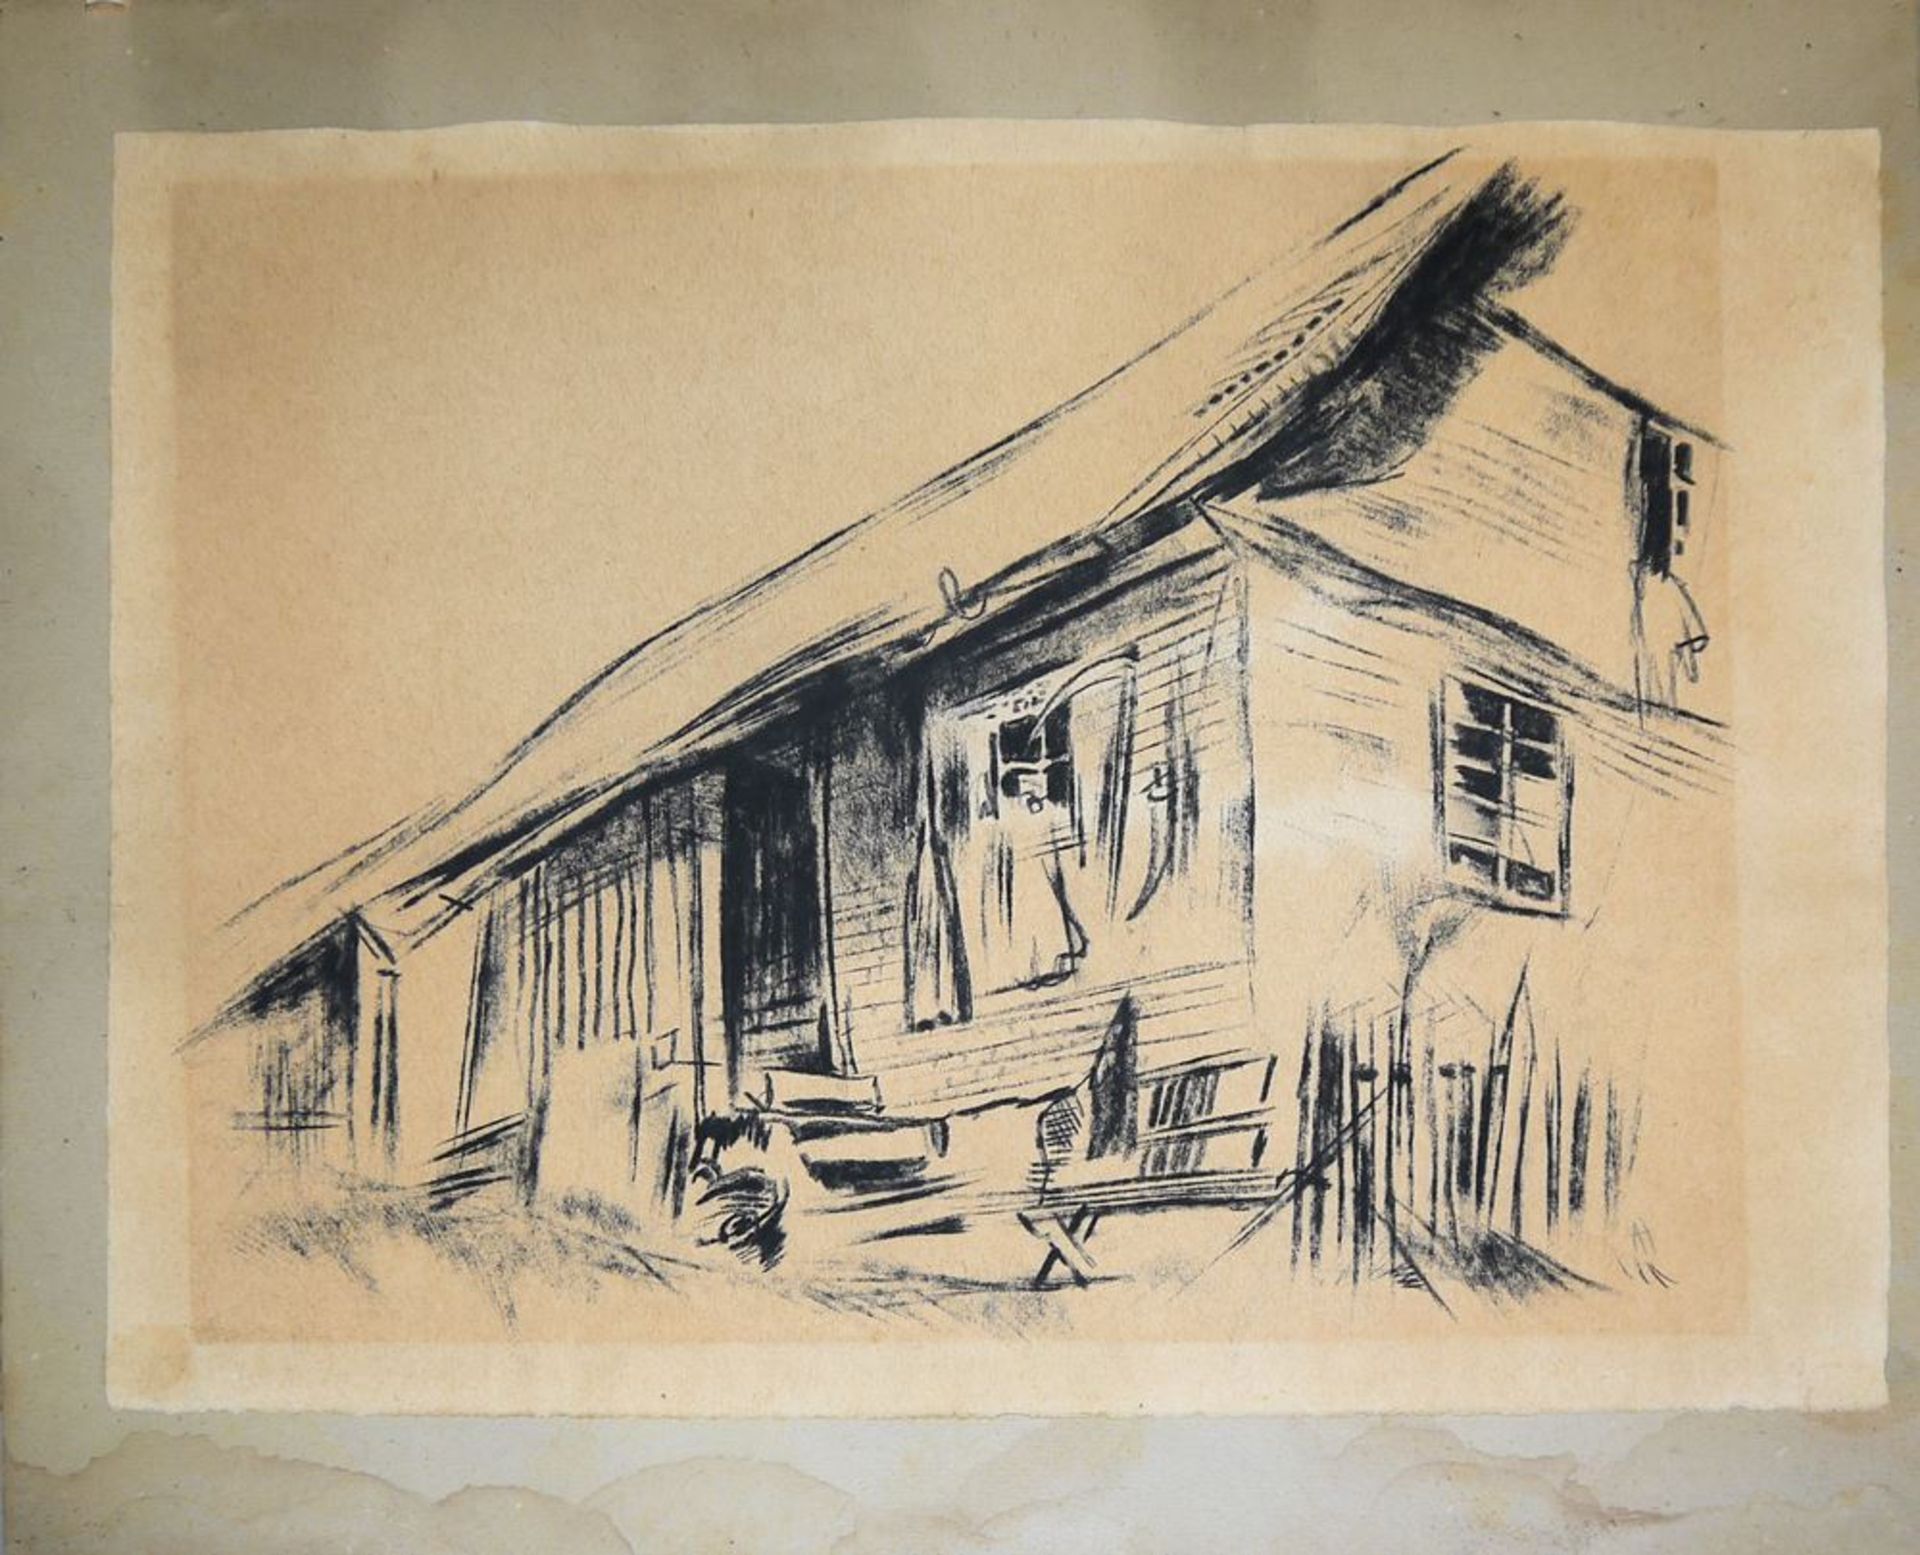 Arnold Heiderich, Two Porträts, etching and lithograph as well as Farmhouse, charcoal drawing, 1926